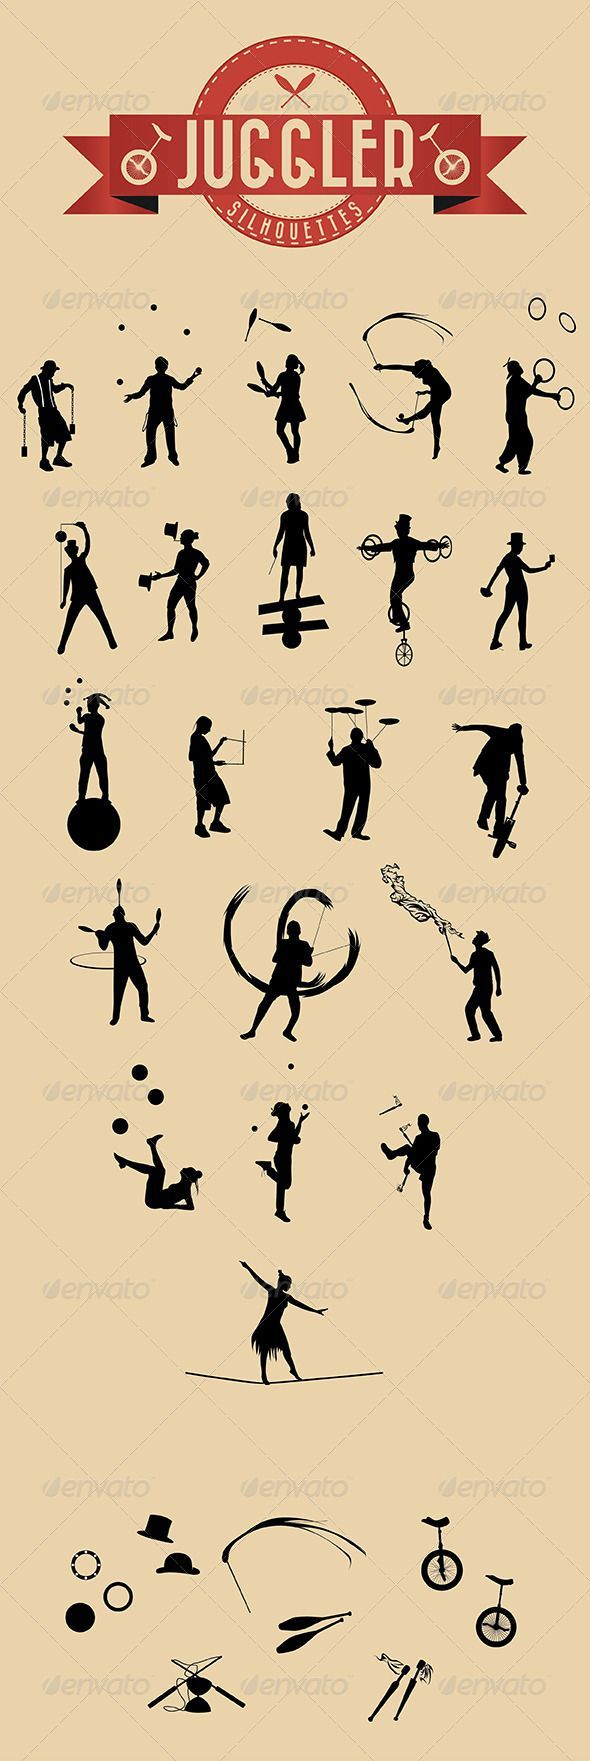 21 Jugglers Vector Silhouettes #GraphicRiver 21 Jugglers Vector Silhouettes completely editable. Useful for your flyers, banner or